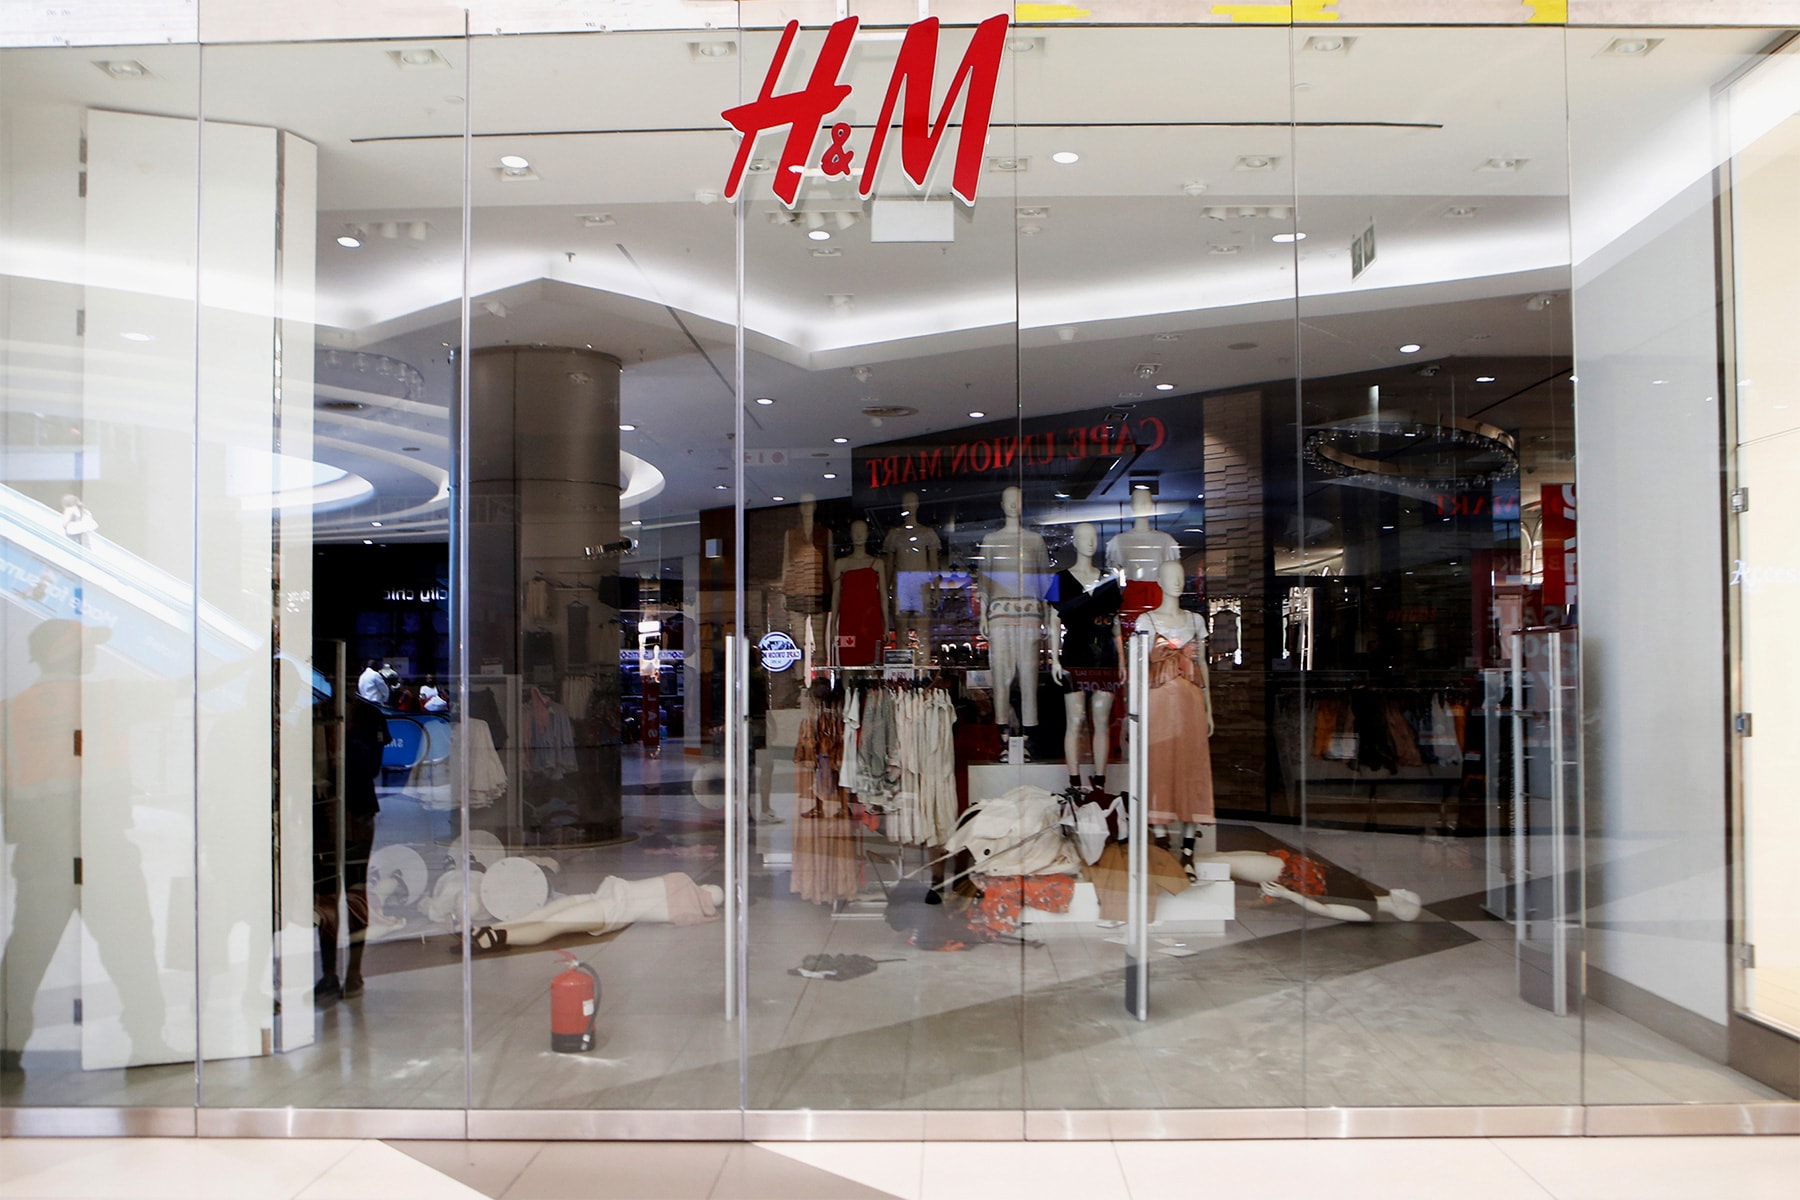 H&M Apologizes for 'Monkey' Image Featuring Black Child - The New